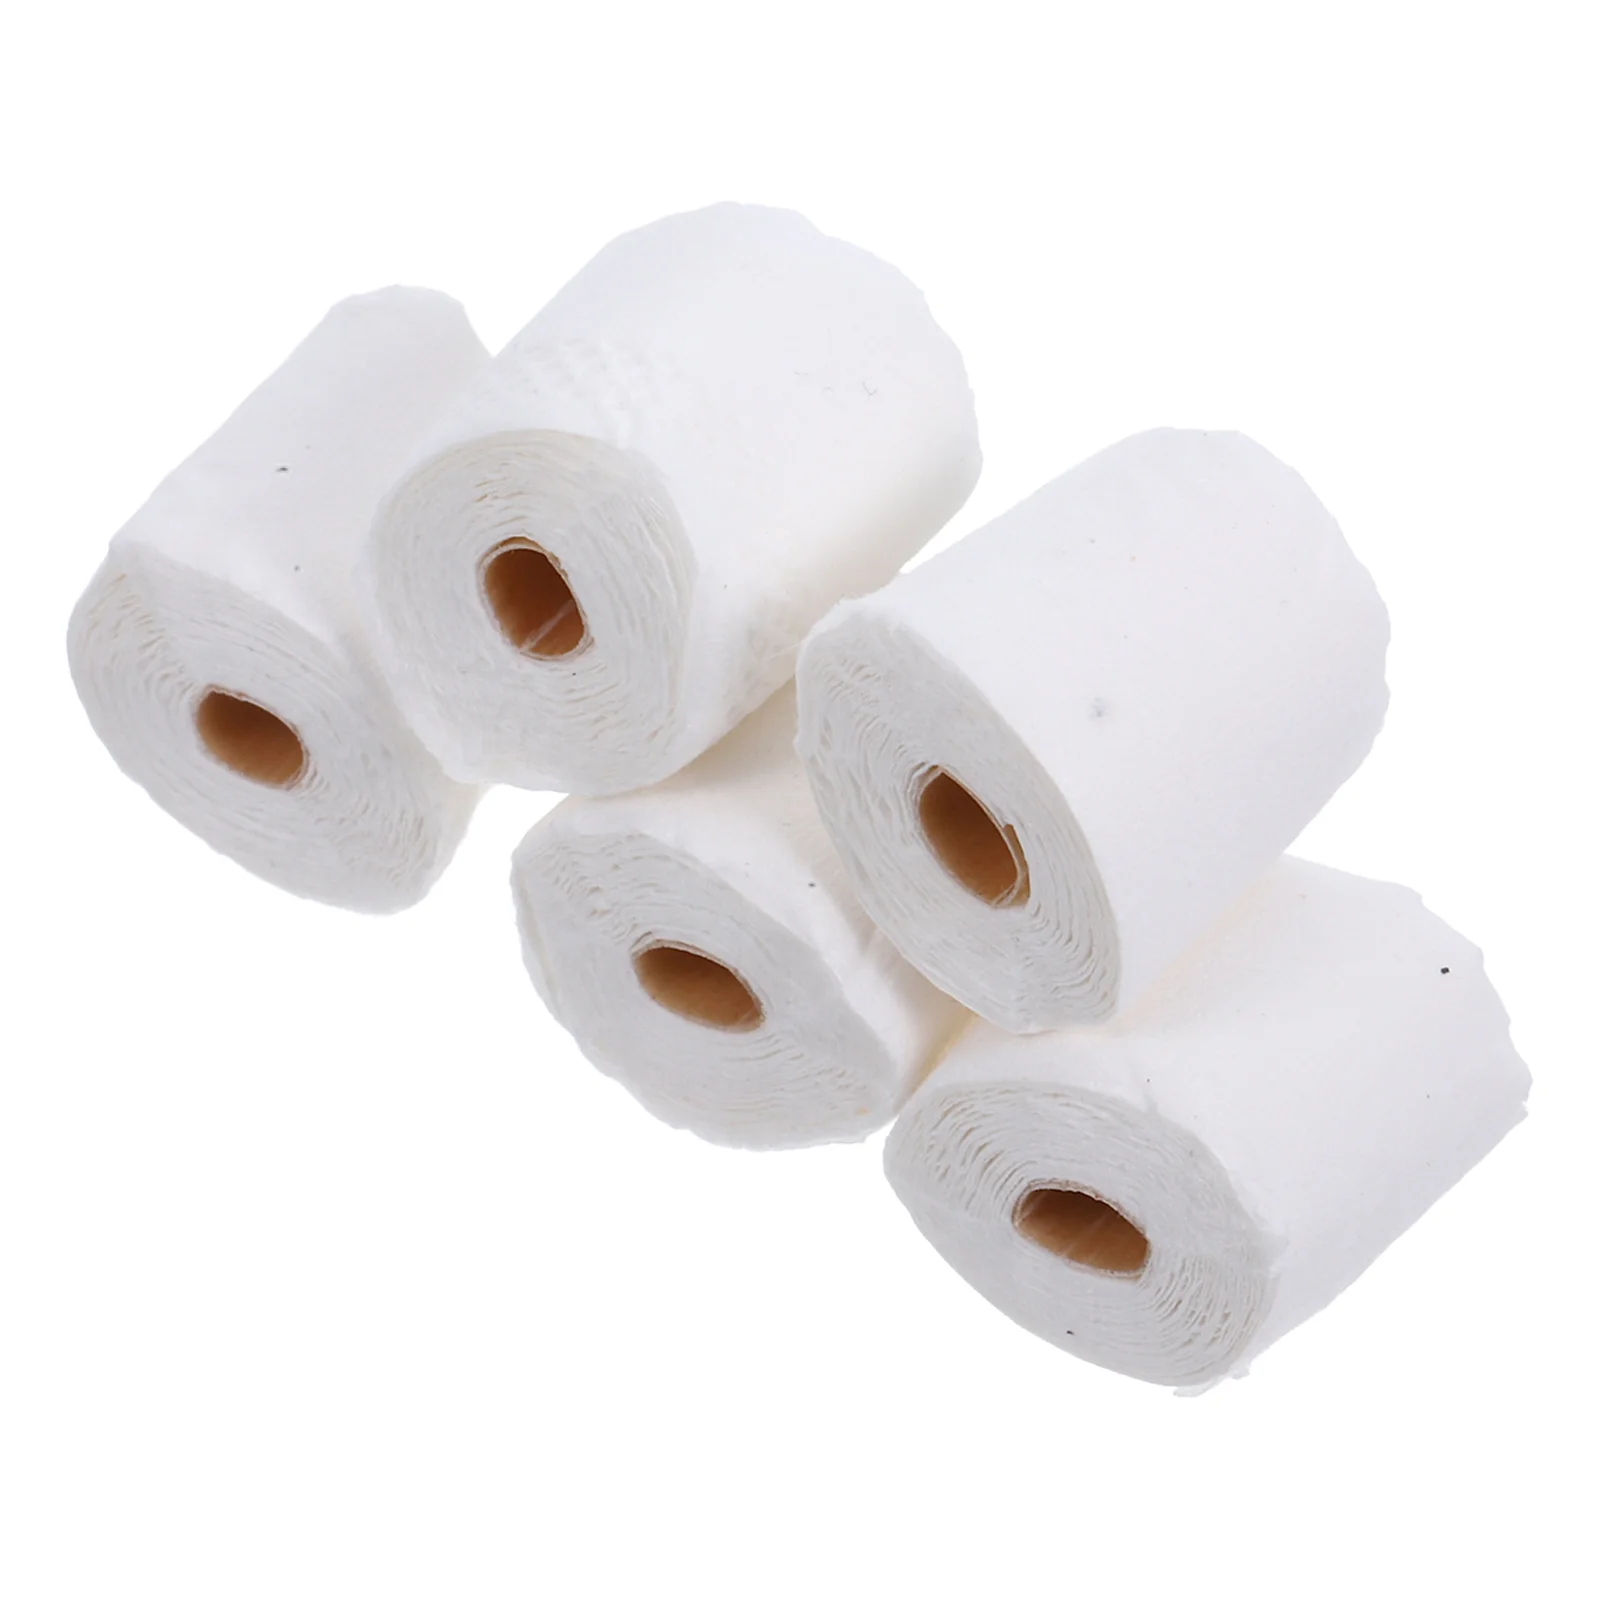 

5pcs Miniature Paper Roll Miniature Toilet Tissue Pack Pretend Play Toy House Layout Prop